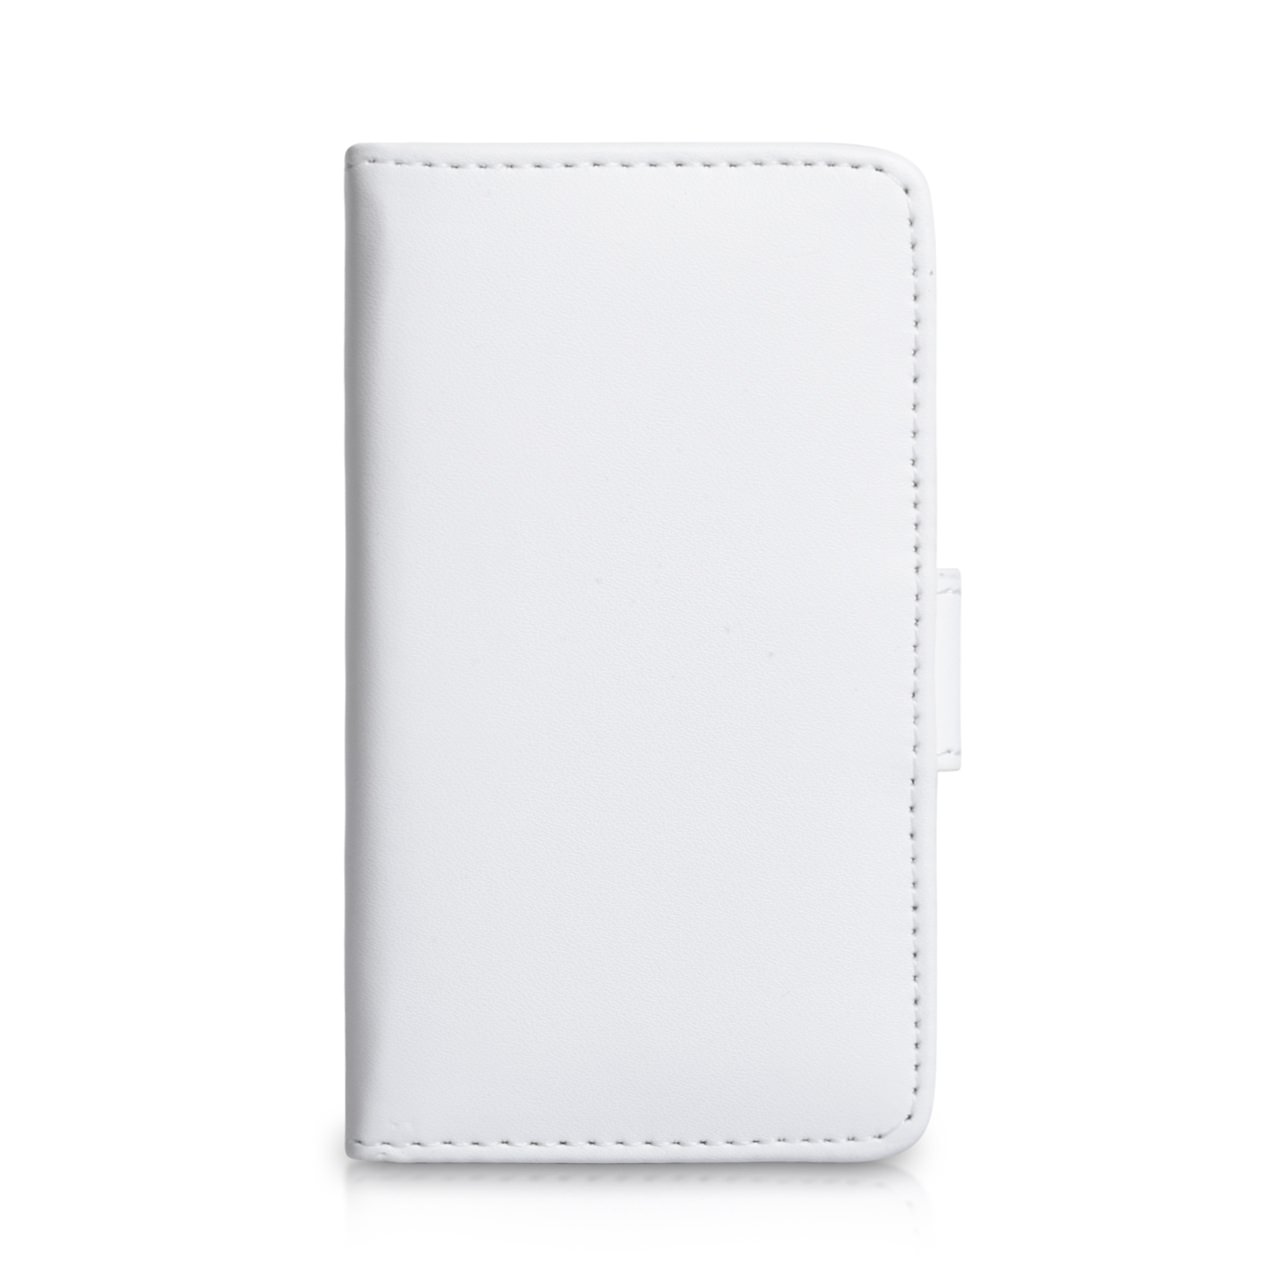 YouSave Accessories Sony Xperia E Leather-Effect Wallet Case - White